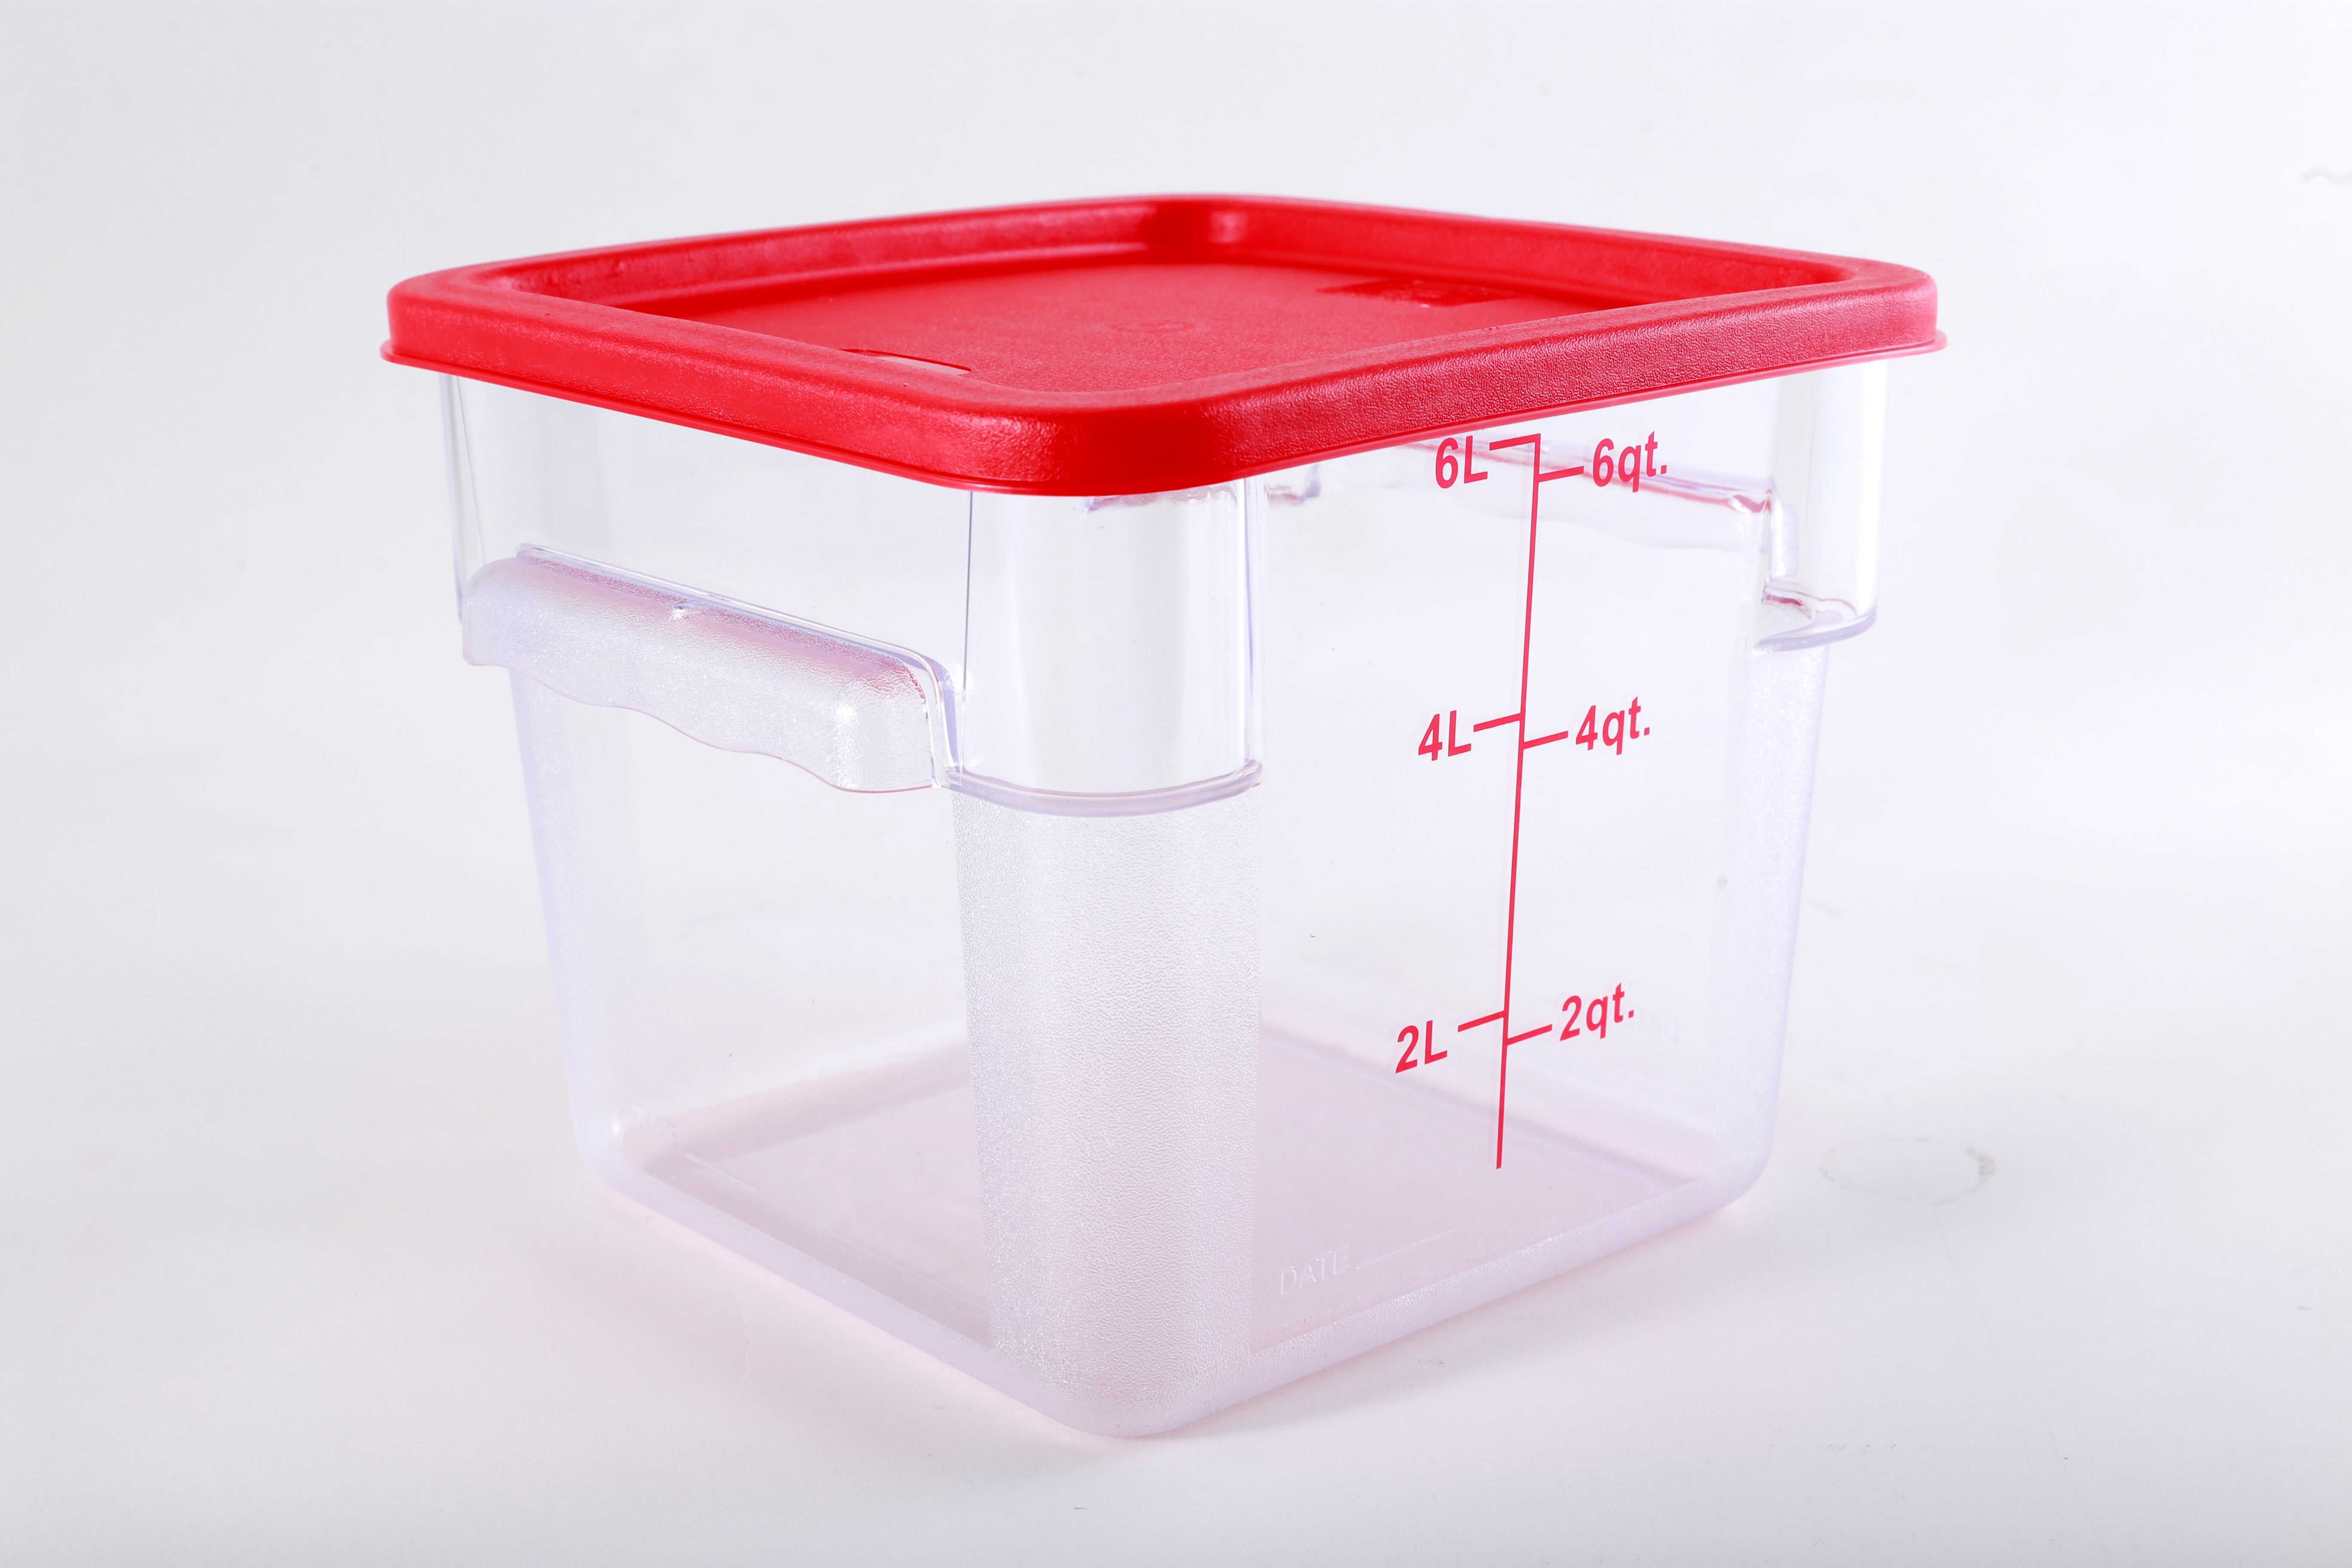 Hakka 6 Qt Commercial Grade Square Food Storage Containers with Lids,Polycarbonate,Clear - Case of 5